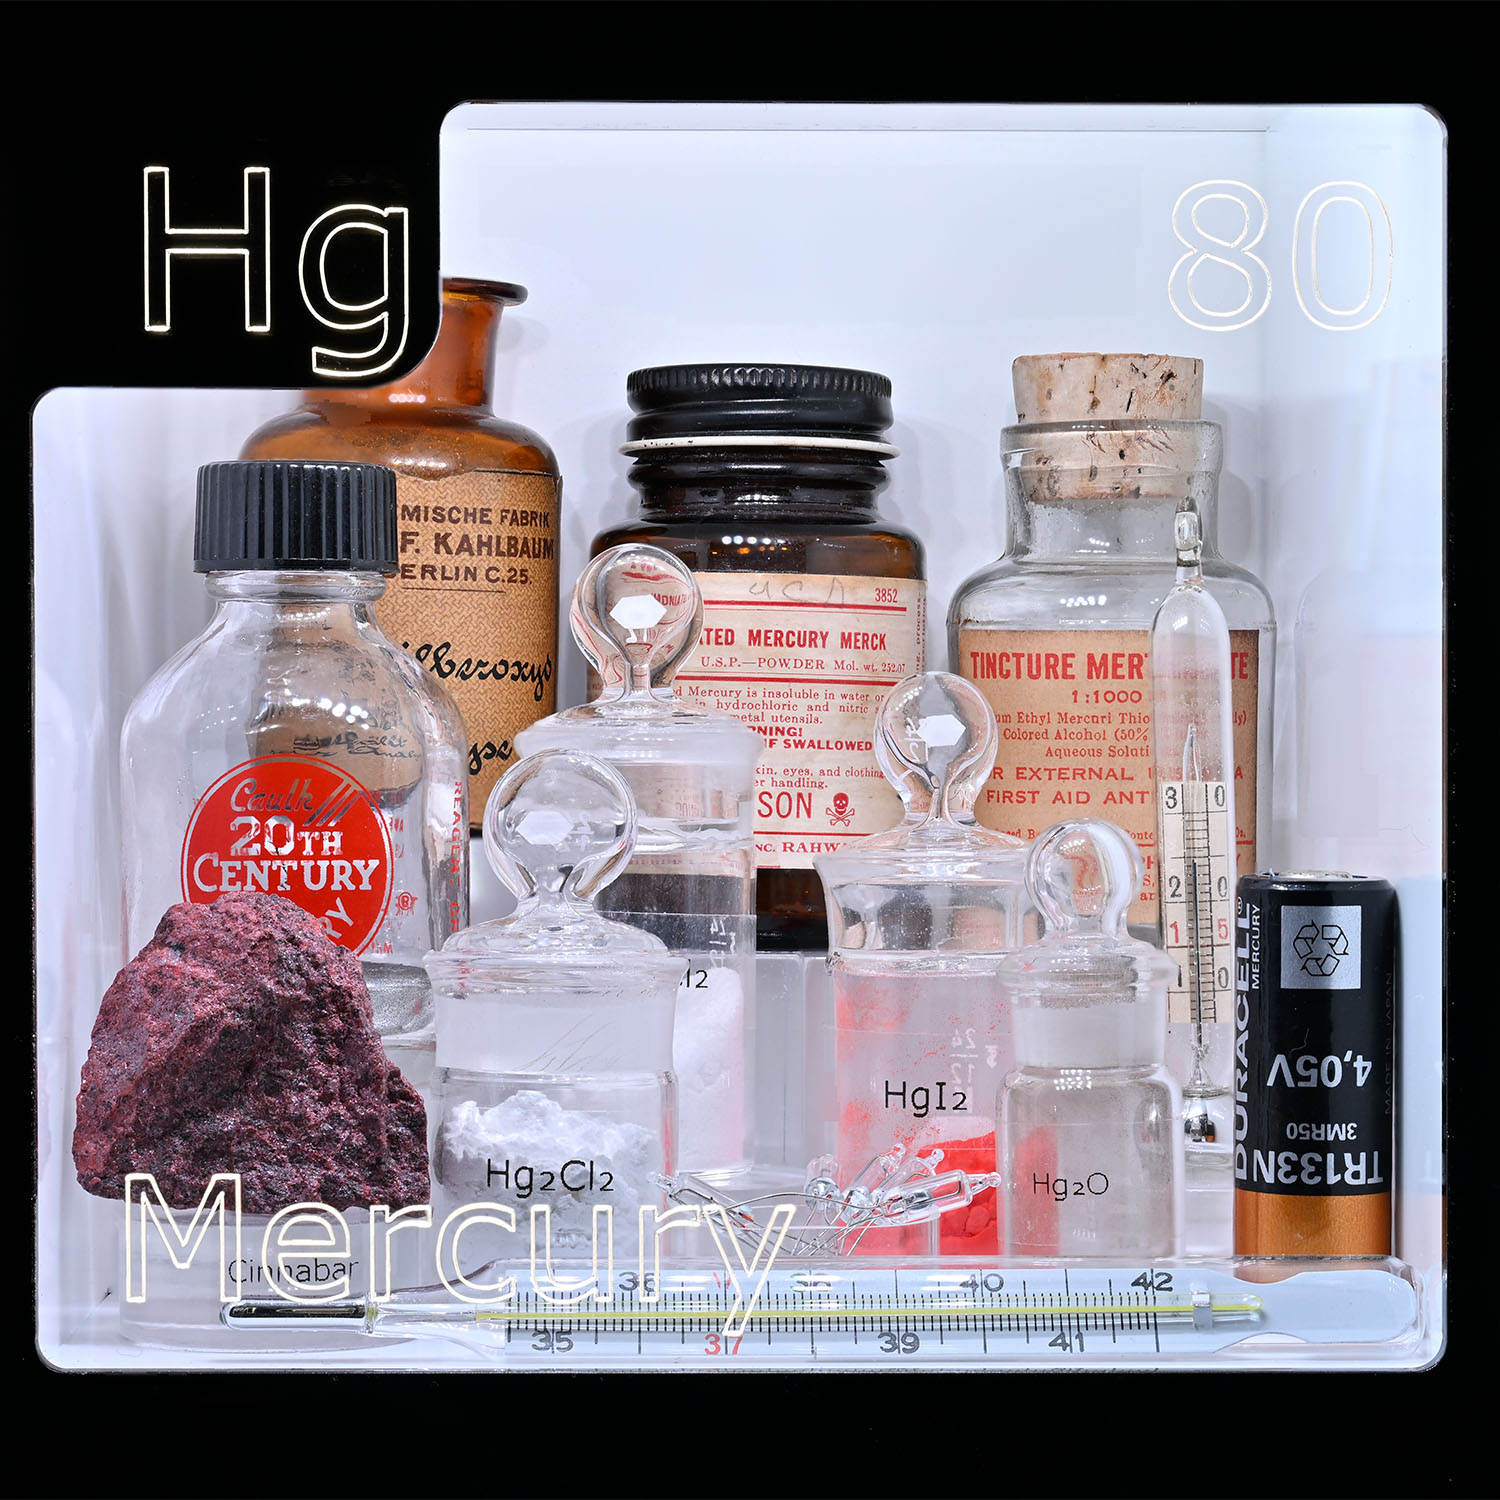 Periodic Table Display - close up of Mercury and the items that contain that element